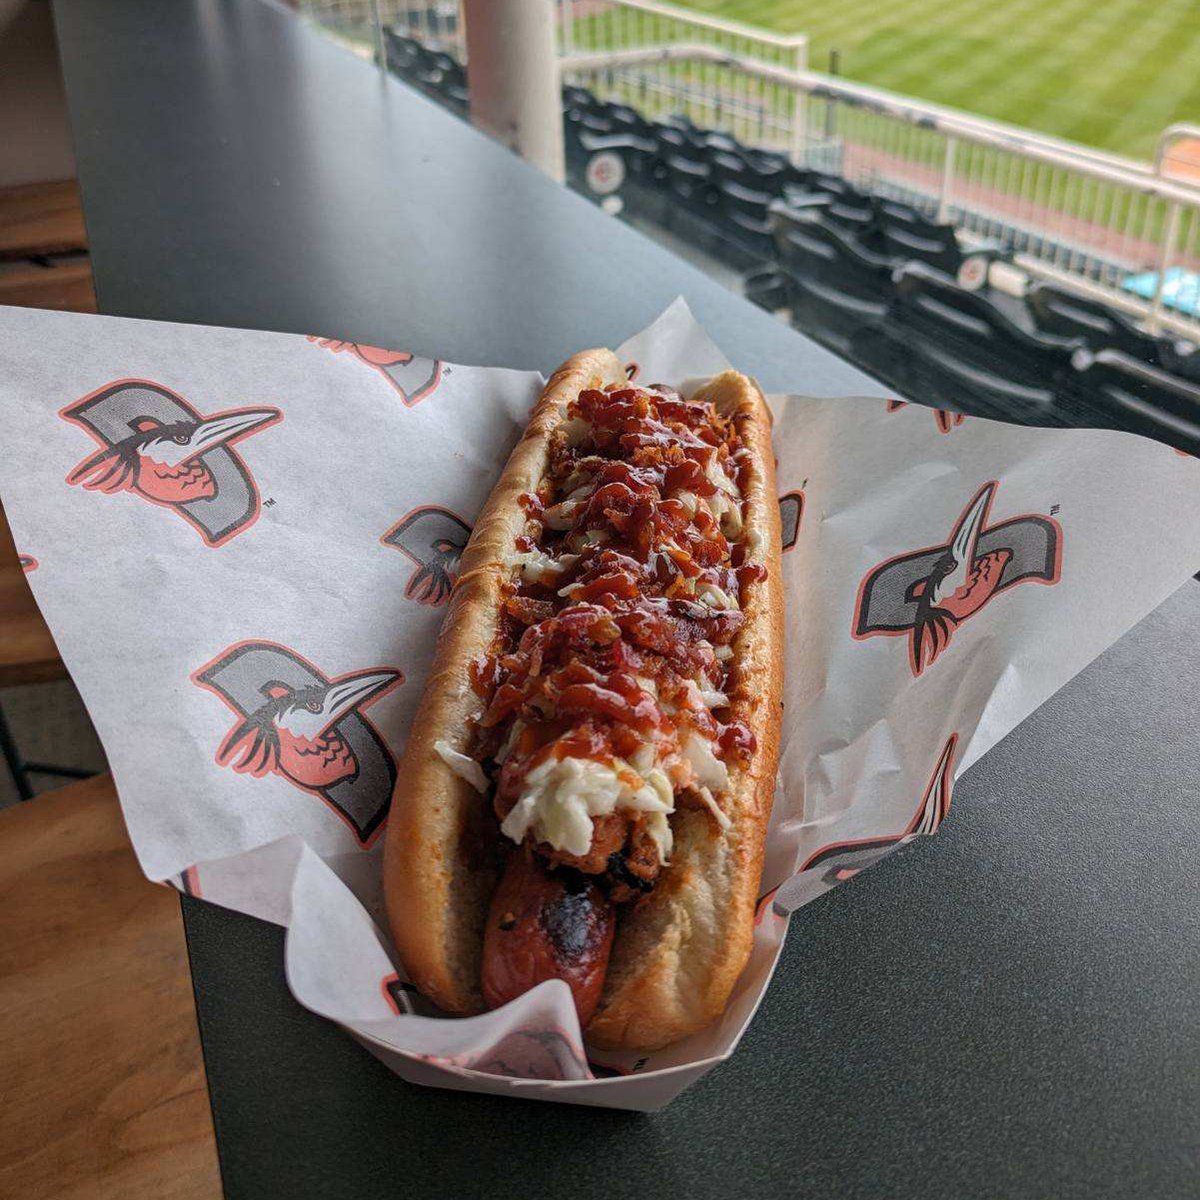 THIS WEEK, fans can enjoy the Shorebirds Salisbury Slaw Dog featuring a footlong hot dog topped with pulled chicken, coleslaw, bacon crumbles, and BBQ sauce! Get yours this homestand only at the Hickory Stand! 👇 Buy Tickets 👉 bit.ly/3HXnktz #FlyTogether | #Birdland